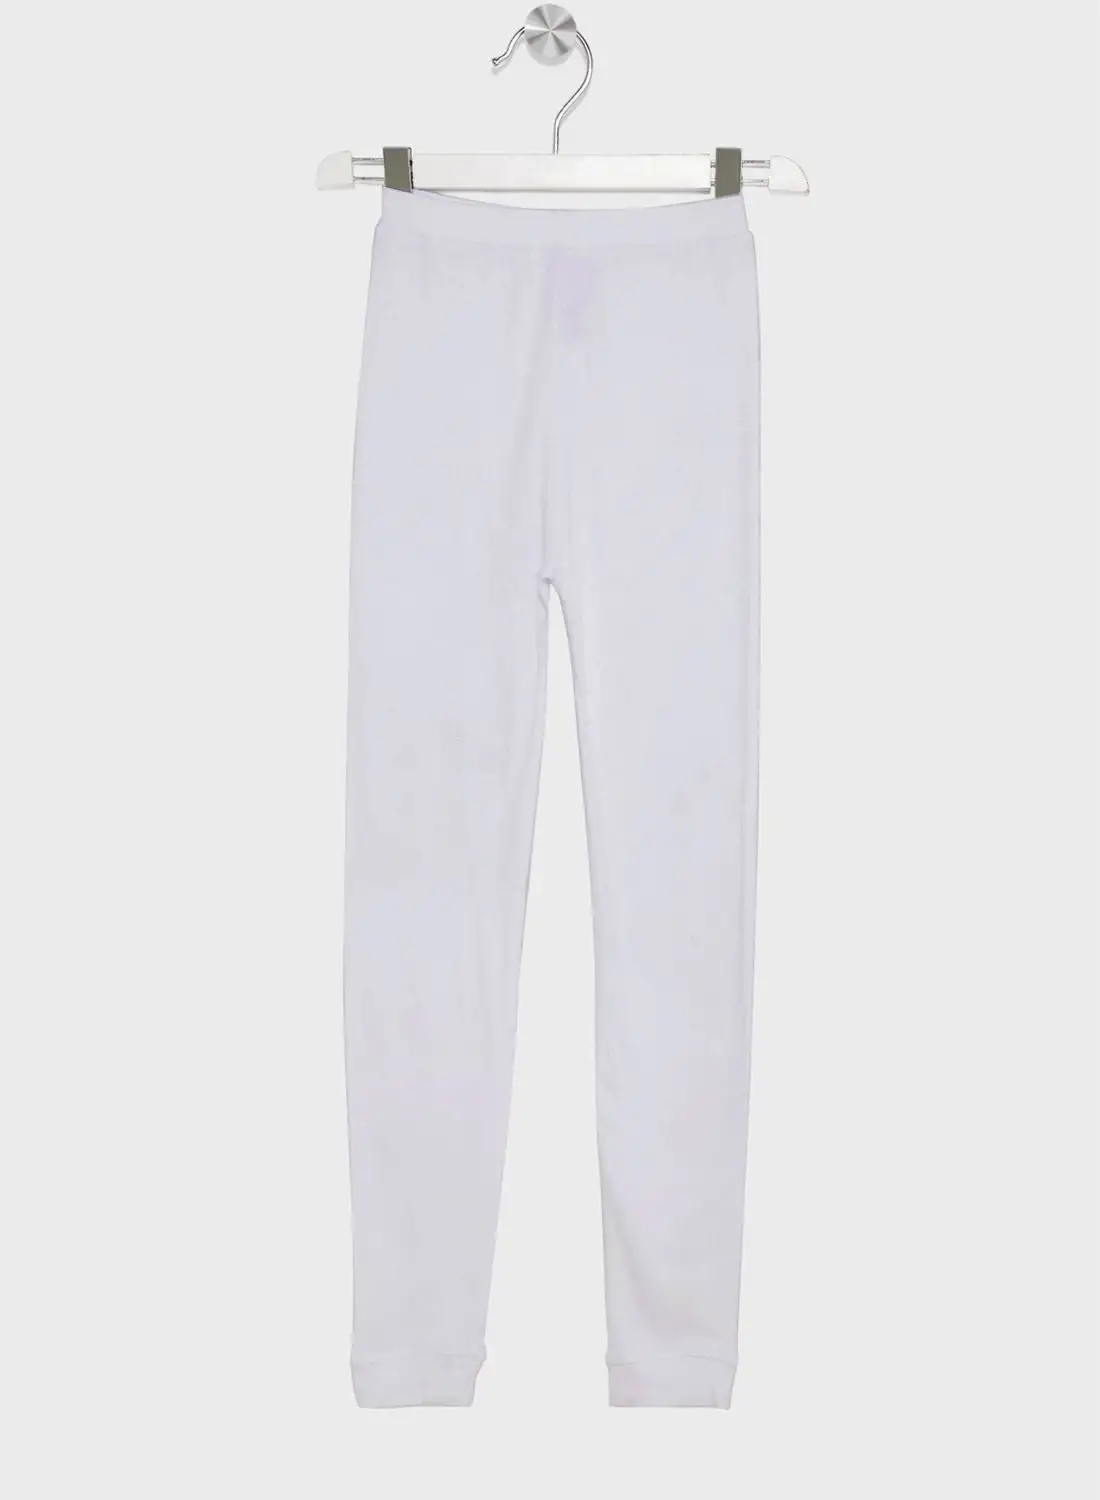 Marks & Spencer Youth Essential Sweatpants